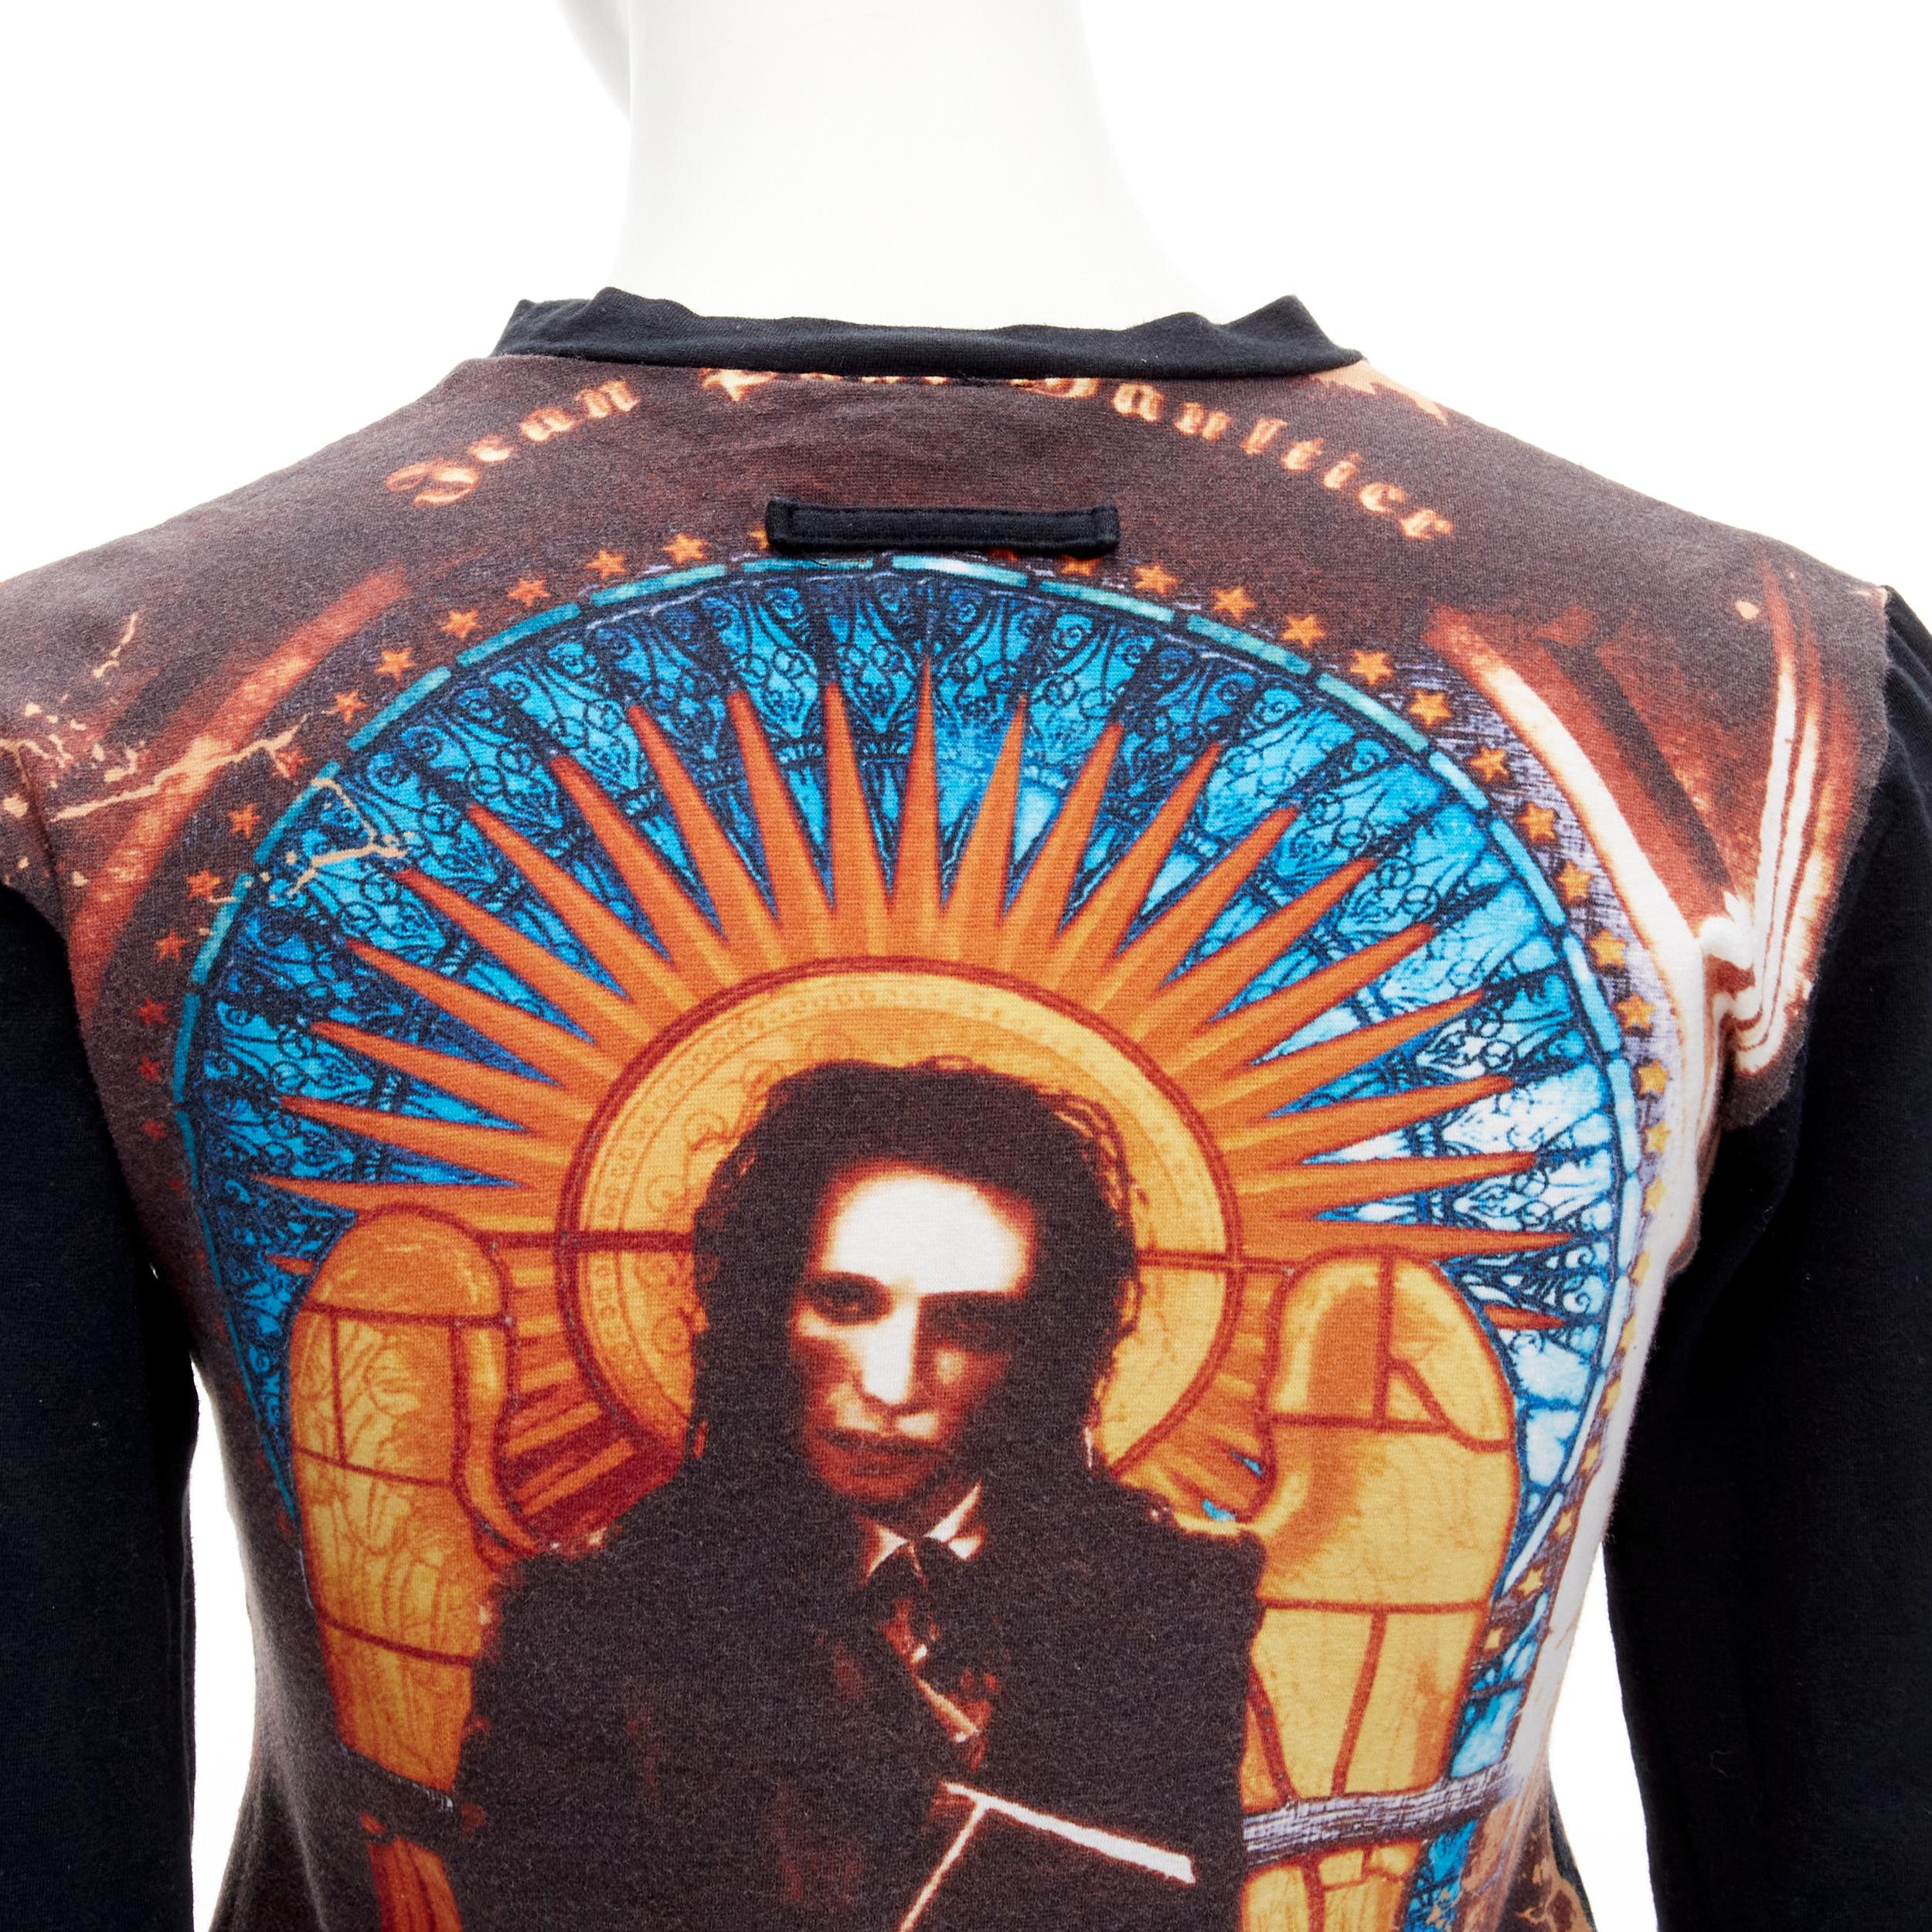 JEAN PAUL GAULTIER 1998 Marilyn Manson cathedral glass goth ringer tshirt IT40 S
Reference: TGAS/C01747
Brand: Jean Paul Gaultier
Designer: Jean Paul Gaultier
Collection: 1998 Marilyn Manson
Material: Cotton, Blend
Color: Multicolour
Pattern: